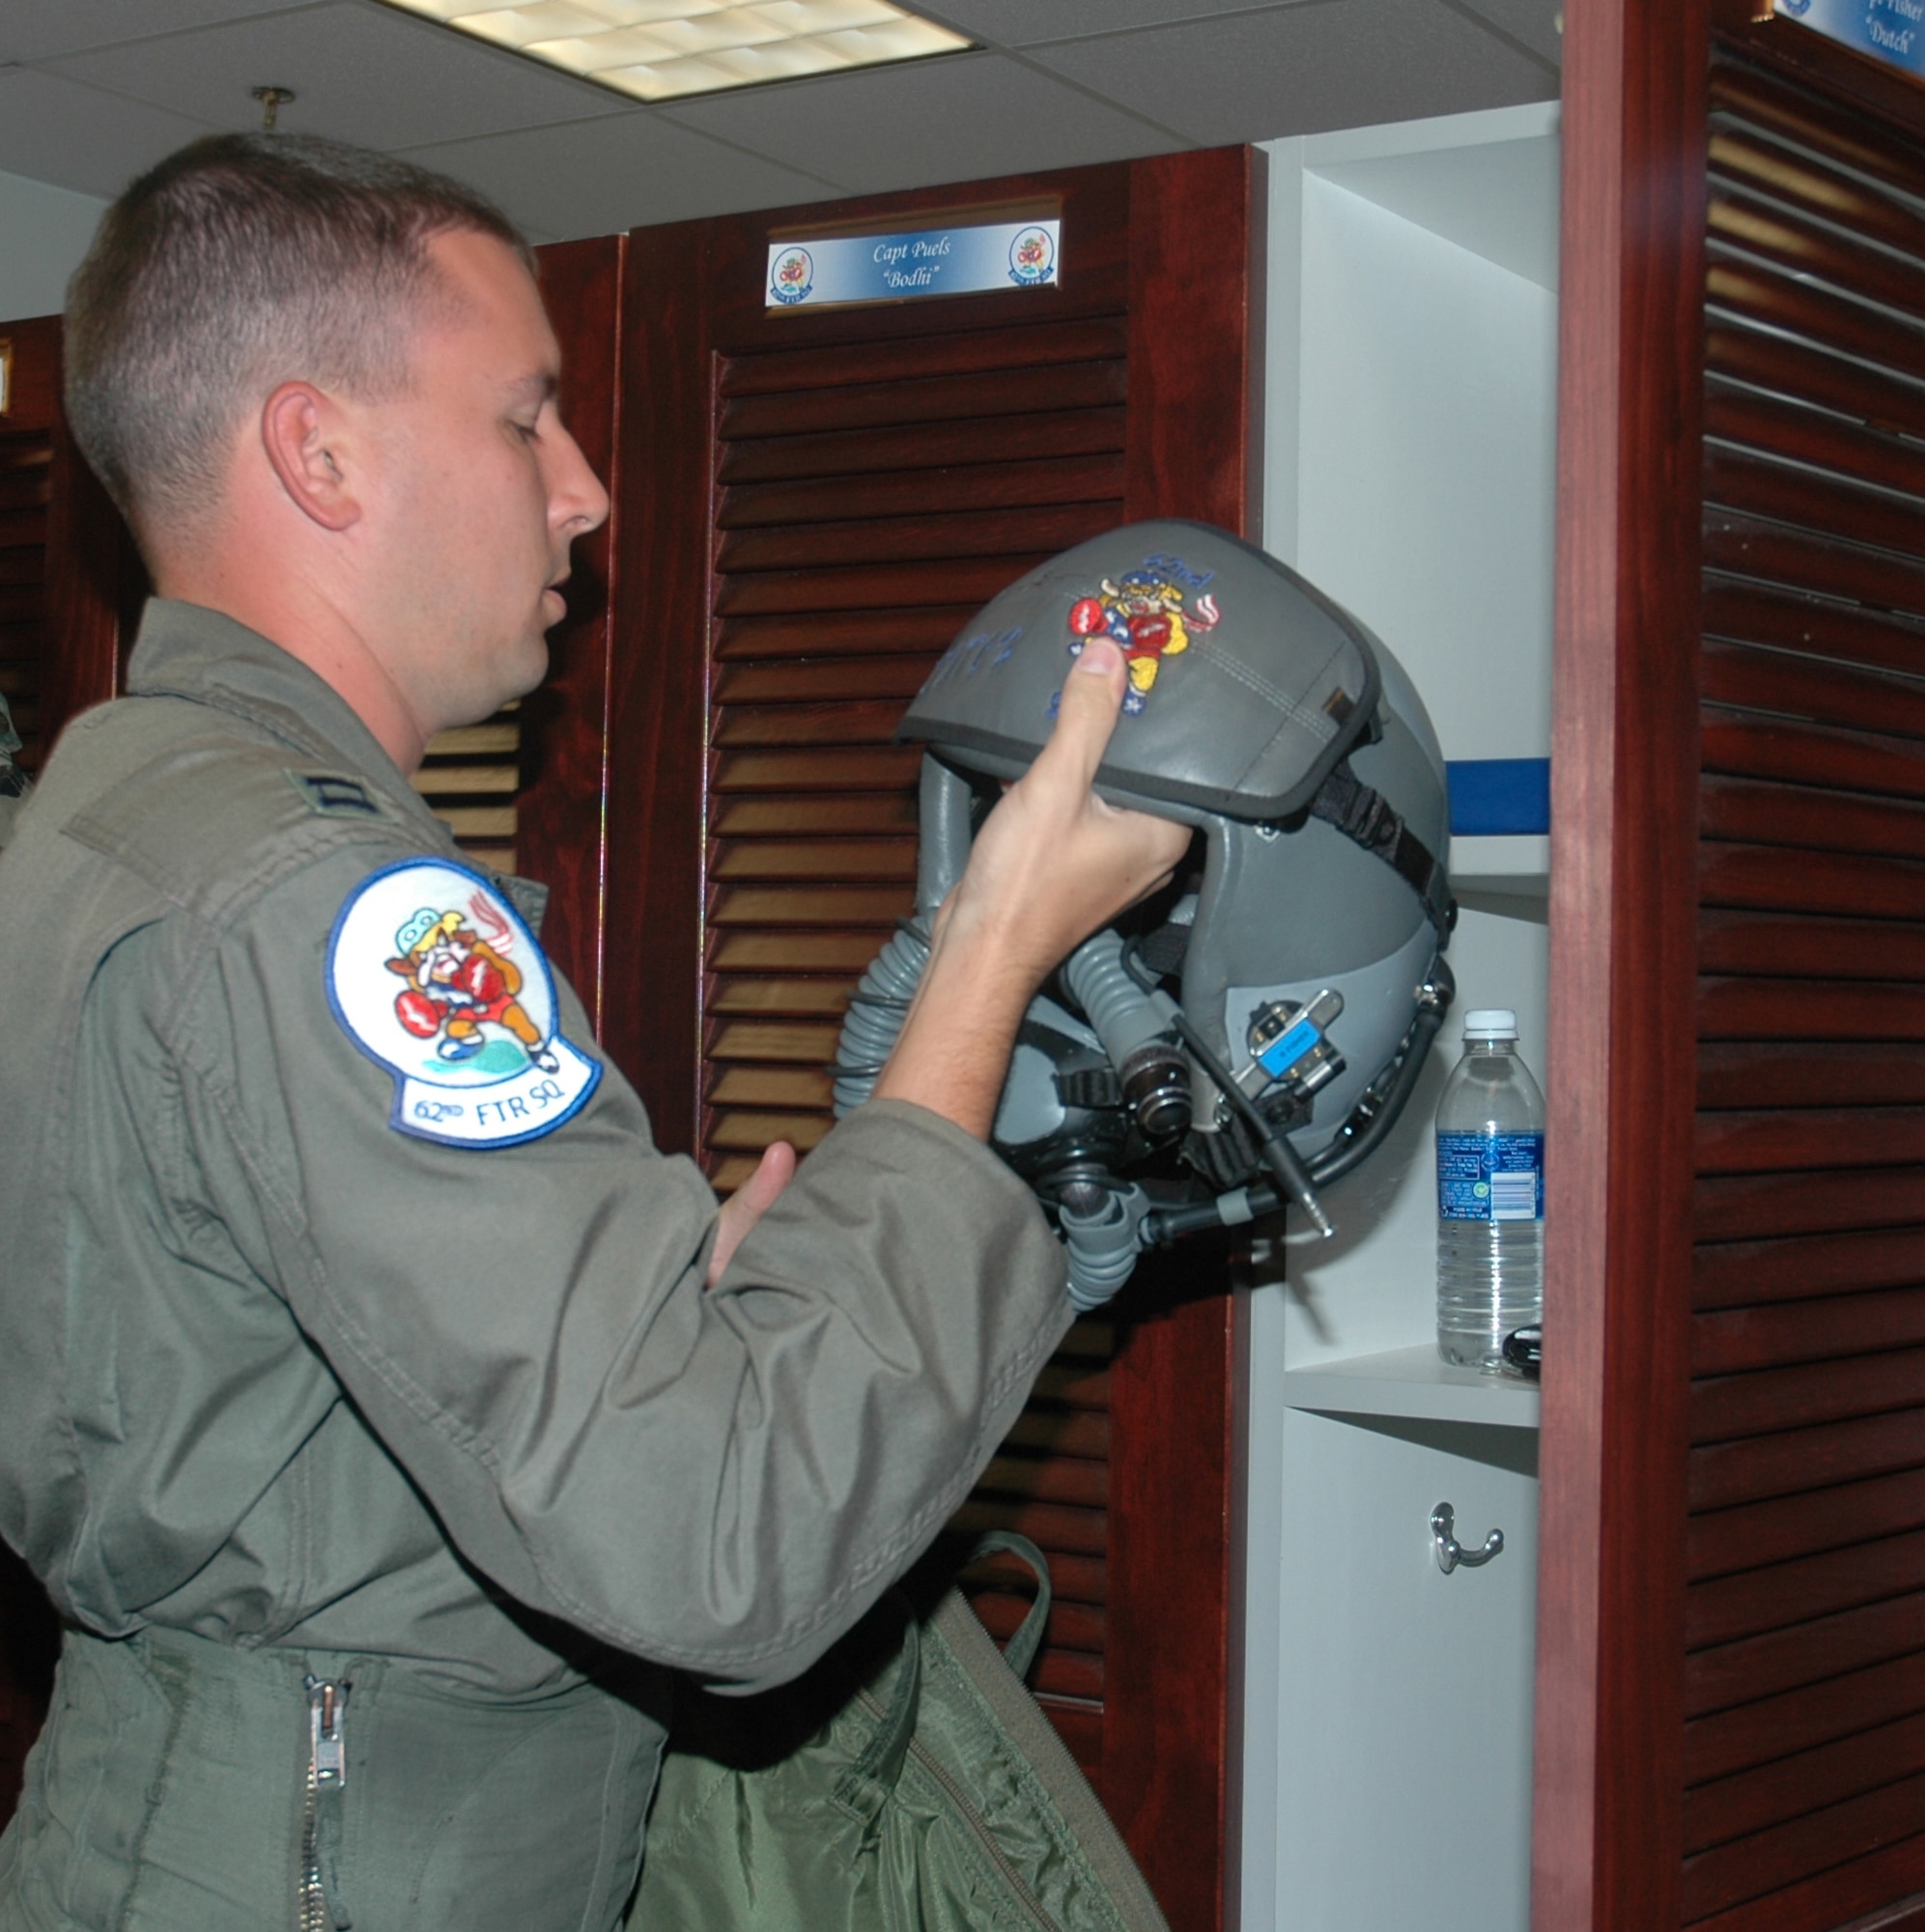 Capt. Kevin Fisher, 62nd Fighter Squadron D-flight commander, suits up before flying “red air” in an F-16 against an F-22.  The captain deployed from Luke AFB, Ariz., on July 23 to participate in dissimilar aircraft training at Tyndall. (U.S. Air Force photo/Staff Sgt. Vesta Anderson)